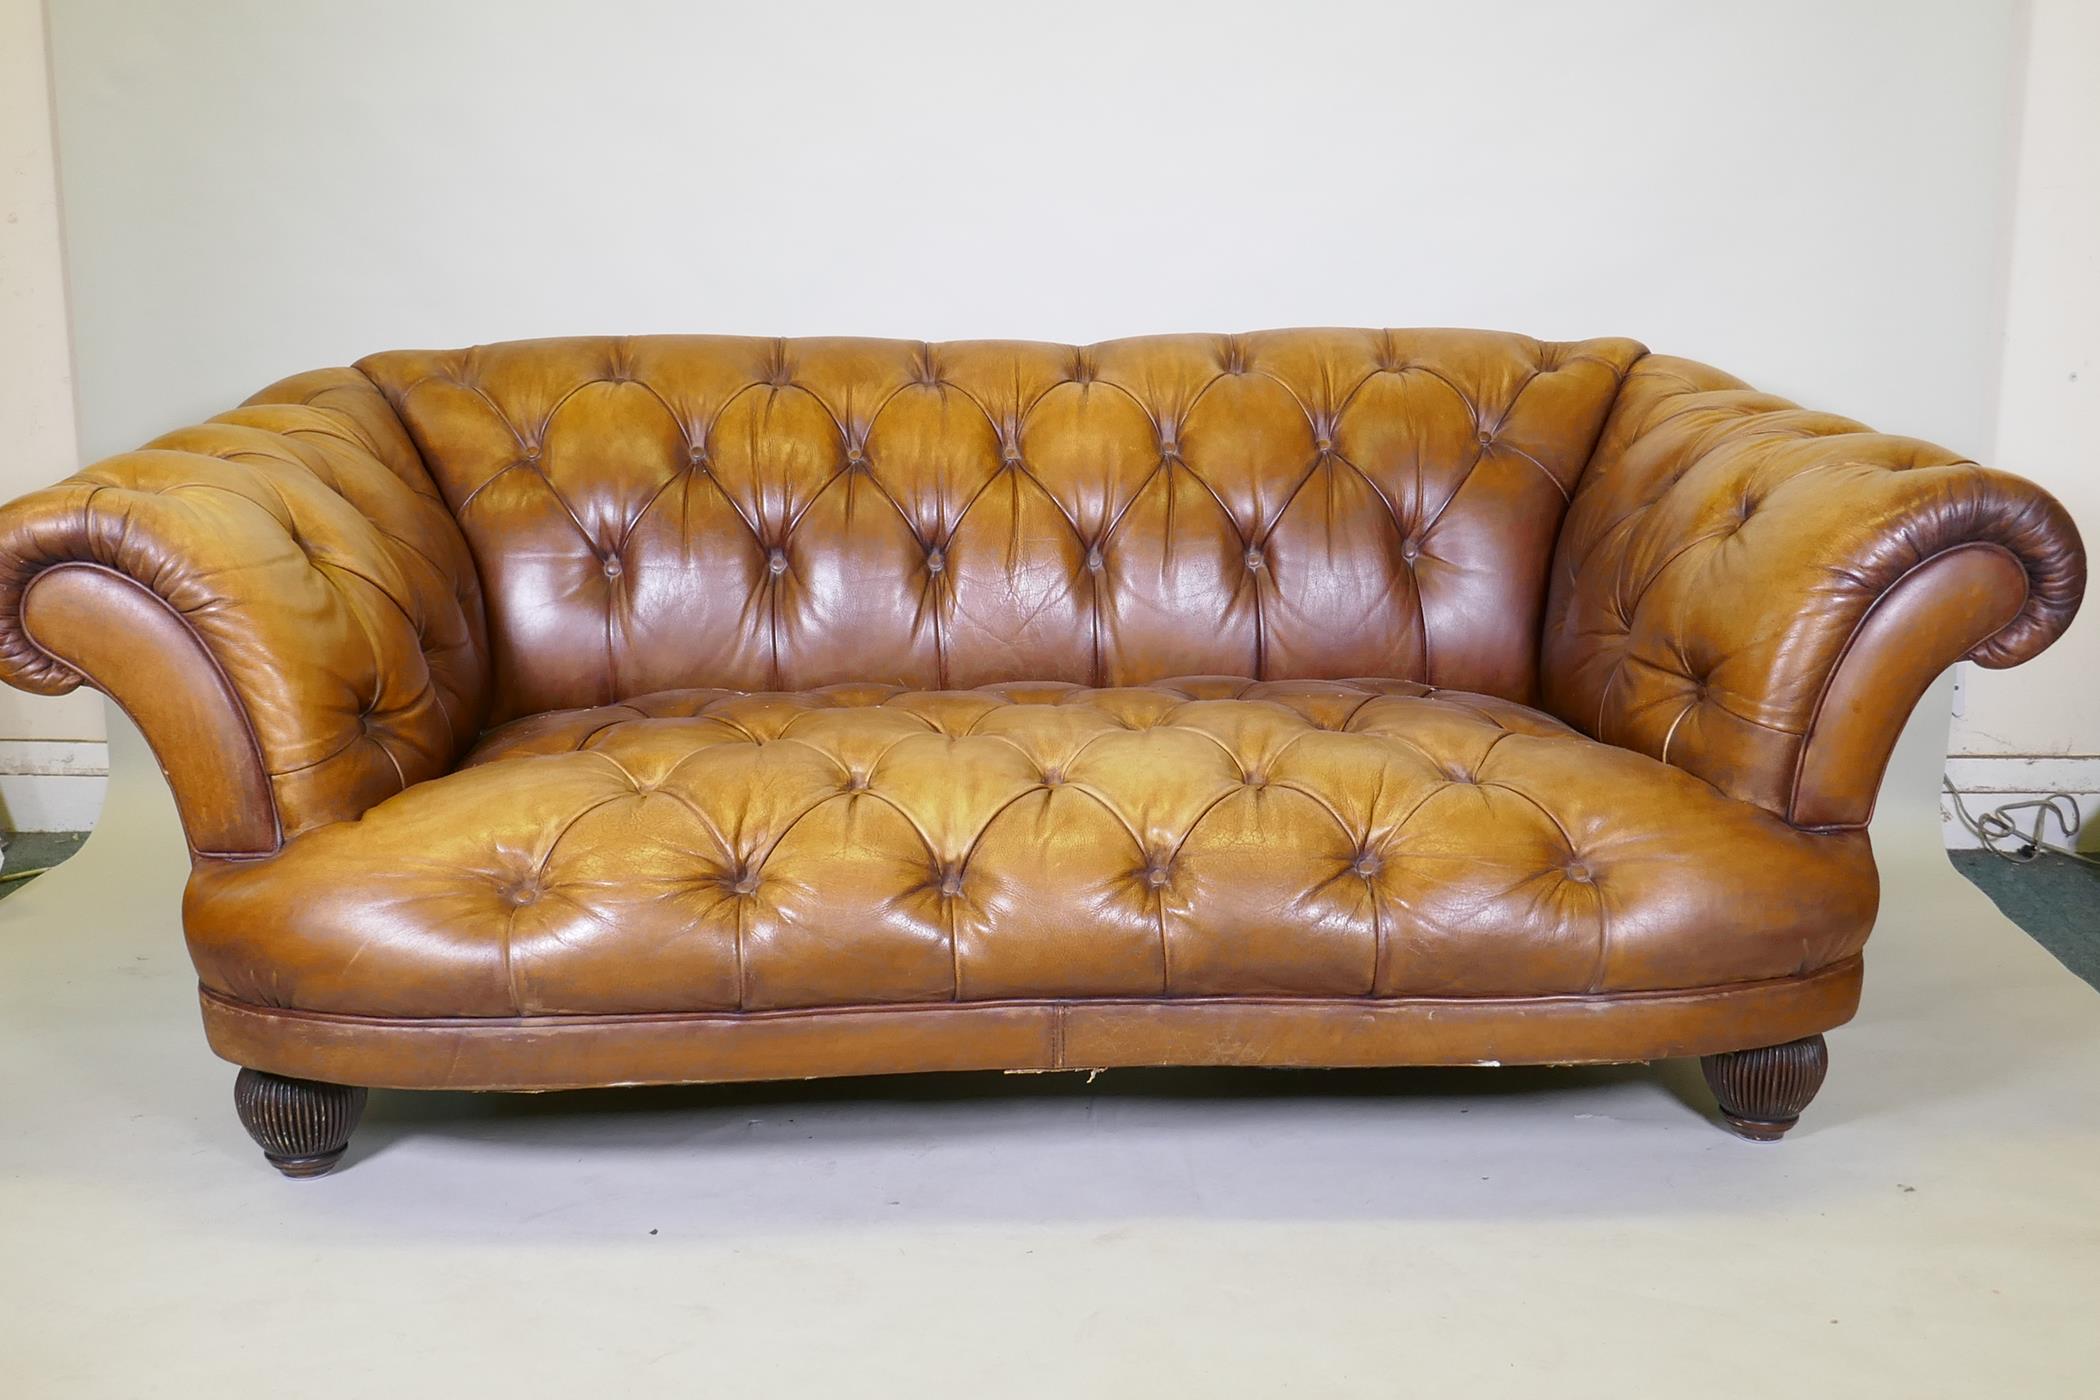 A Tetrad button leather Chesterfield style sofa, 2109cm wide